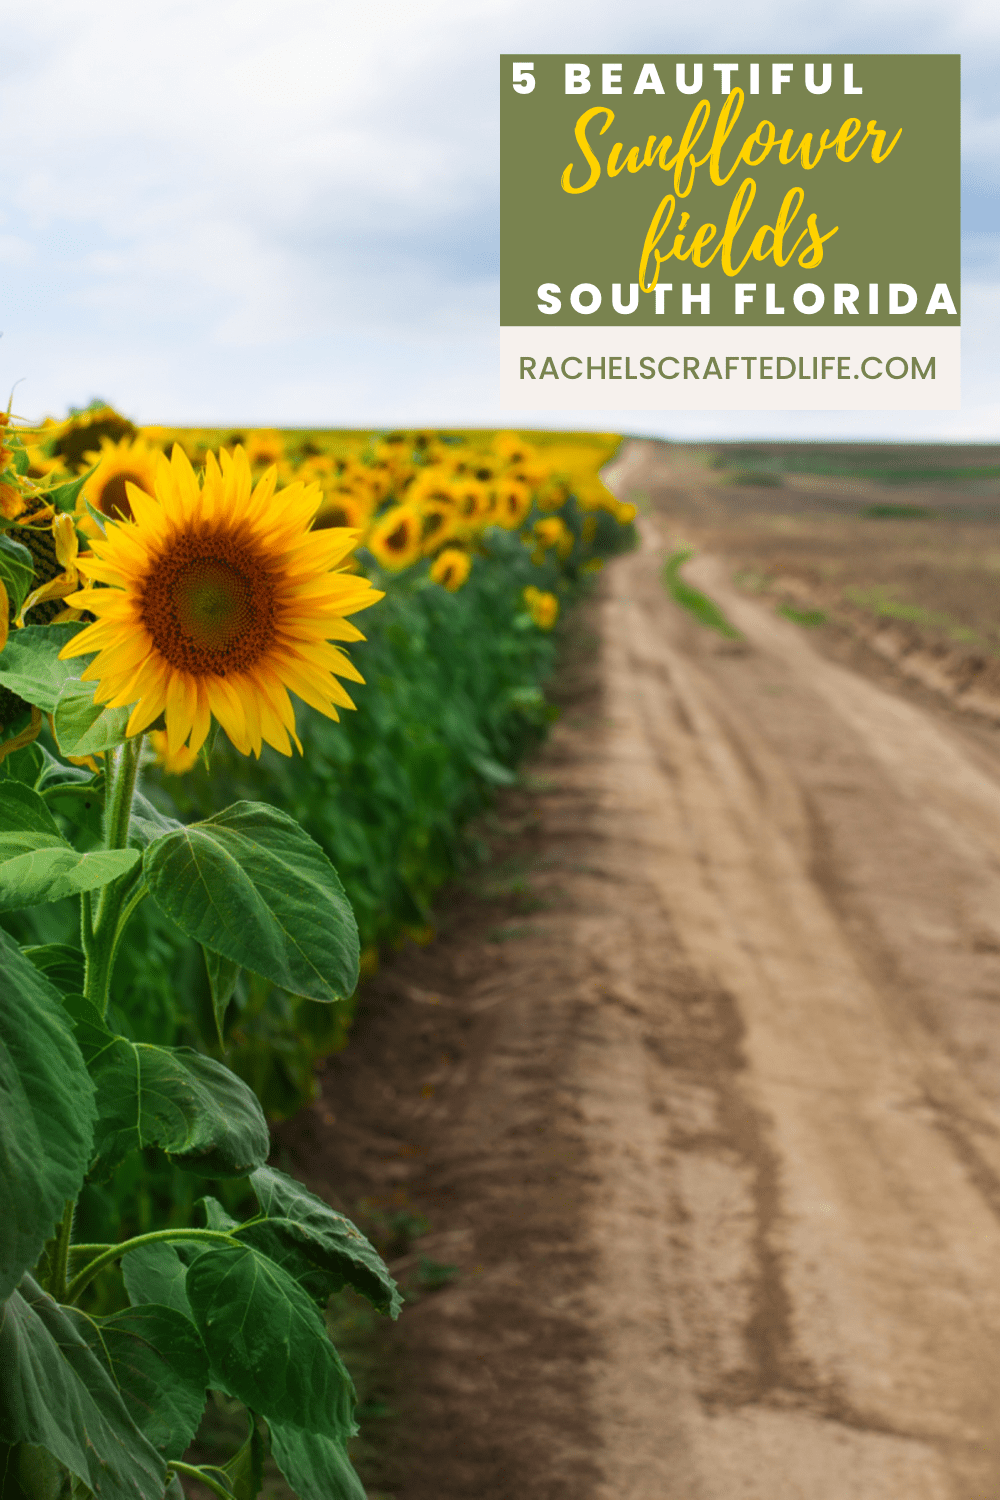 You are currently viewing 5 Beautiful Sunflower Fields in South Florida